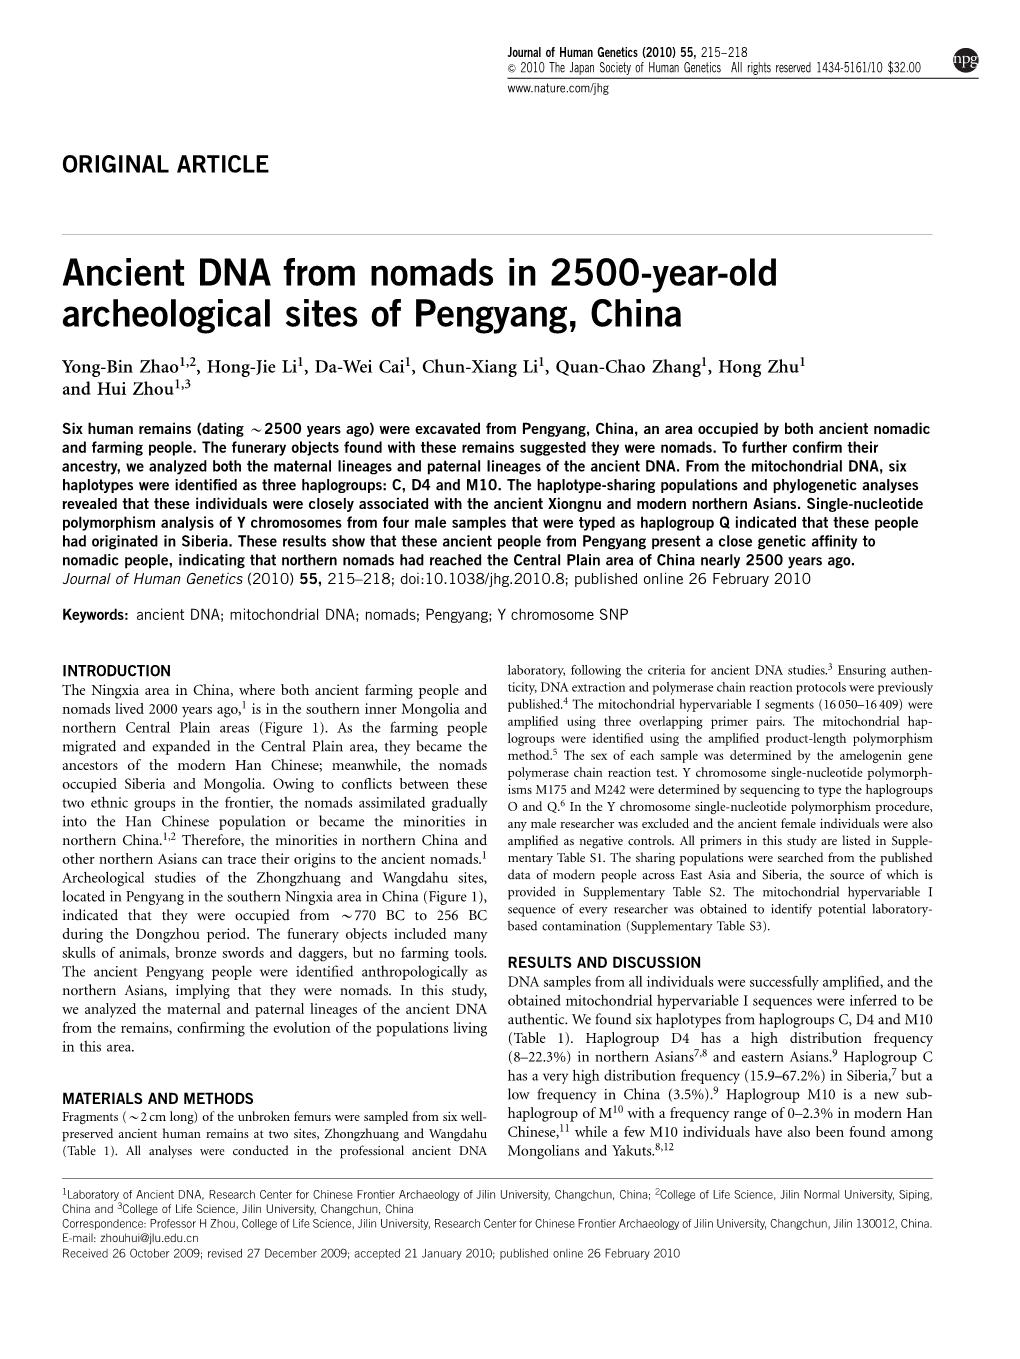 Ancient DNA from Nomads in 2500-Year-Old Archeological Sites of Pengyang, China